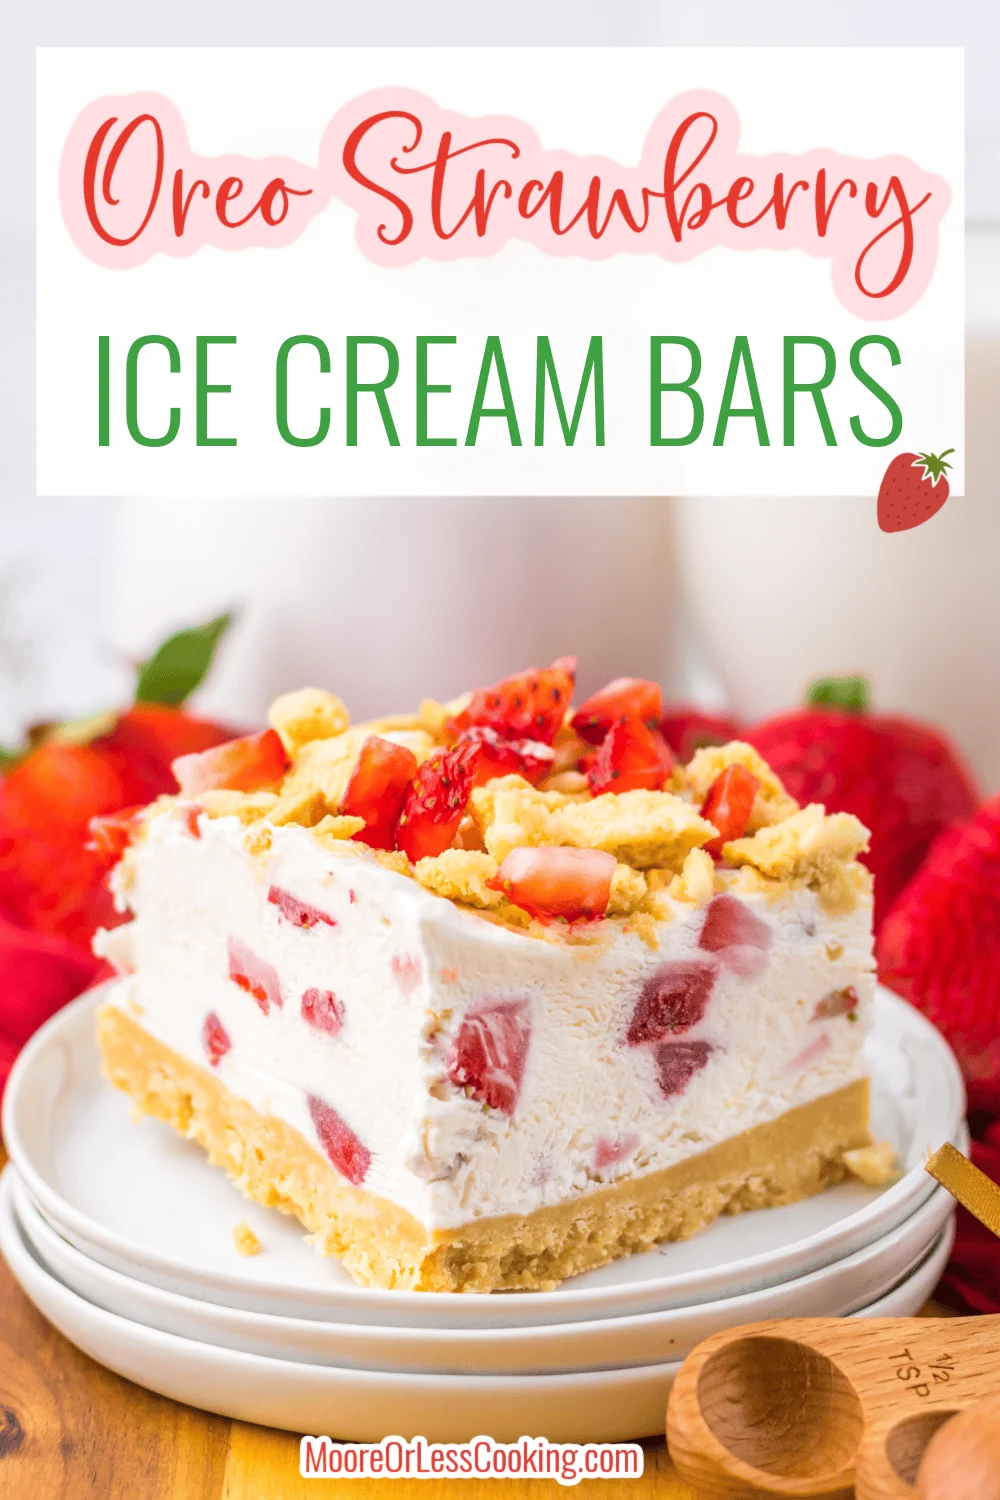 These Oreo Strawberry Ice Cream Bars are such a great no bake summer dessert. Golden oreos make up the crust for a luscious homemade ice cream filling made with heavy whipping cream, sweetened condensed milk and fresh strawberries. These is a perfect refreshing dessert great for summer. via @Mooreorlesscook